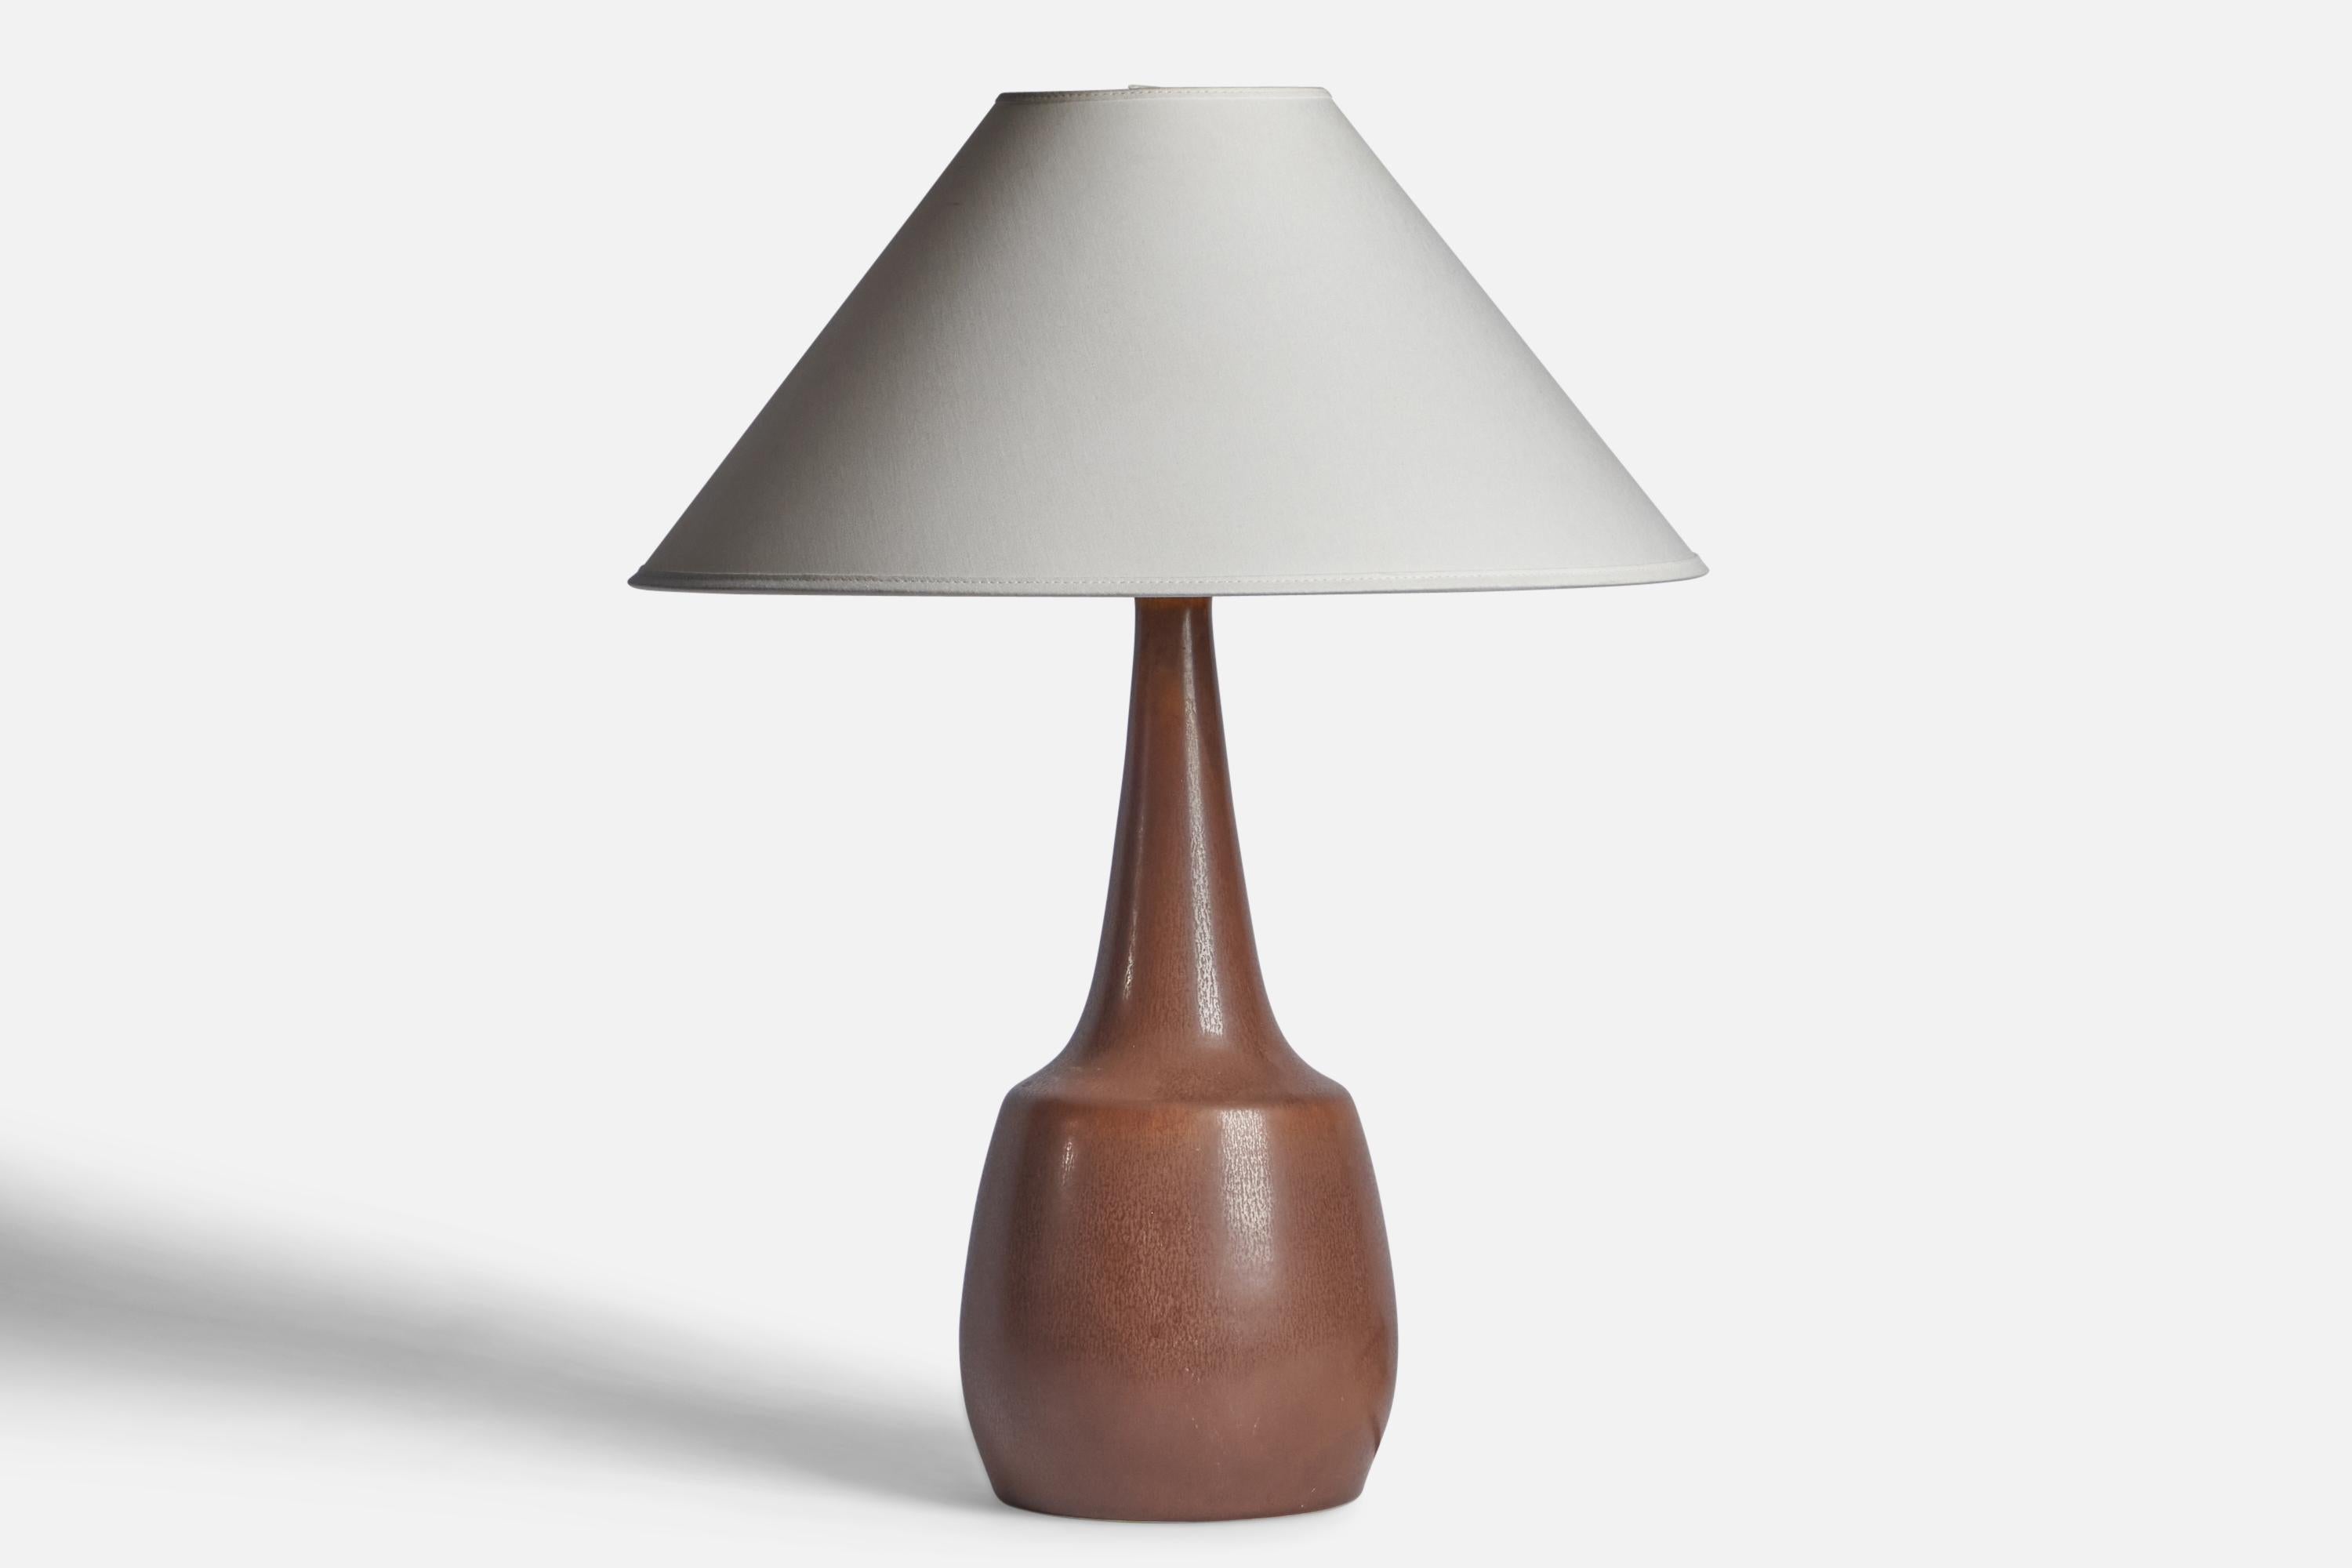 A brown-glazed stoneware table lamp designed by Per & Annelise Linneman-Schmidt and produced by Palshus, Denmark, 1960s.

Dimensions of Lamp (inches): 16.75” H x 6.25” Diameter
Dimensions of Shade (inches): 4.5” Top Diameter x 16” Bottom Diameter x